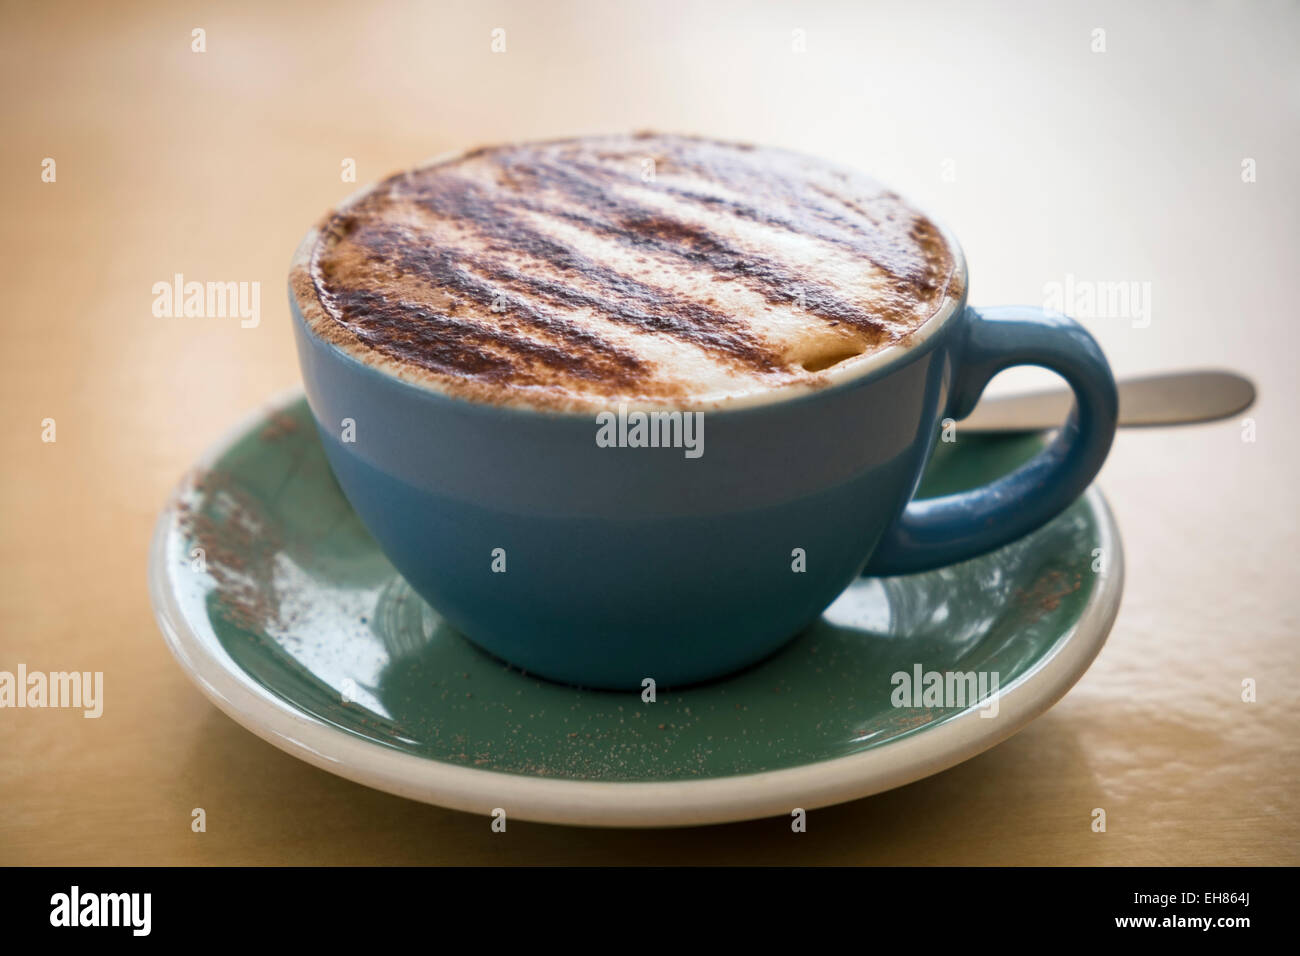 Cup of cappuccino coffee with chocolate sprinkled on top. Stock Photo